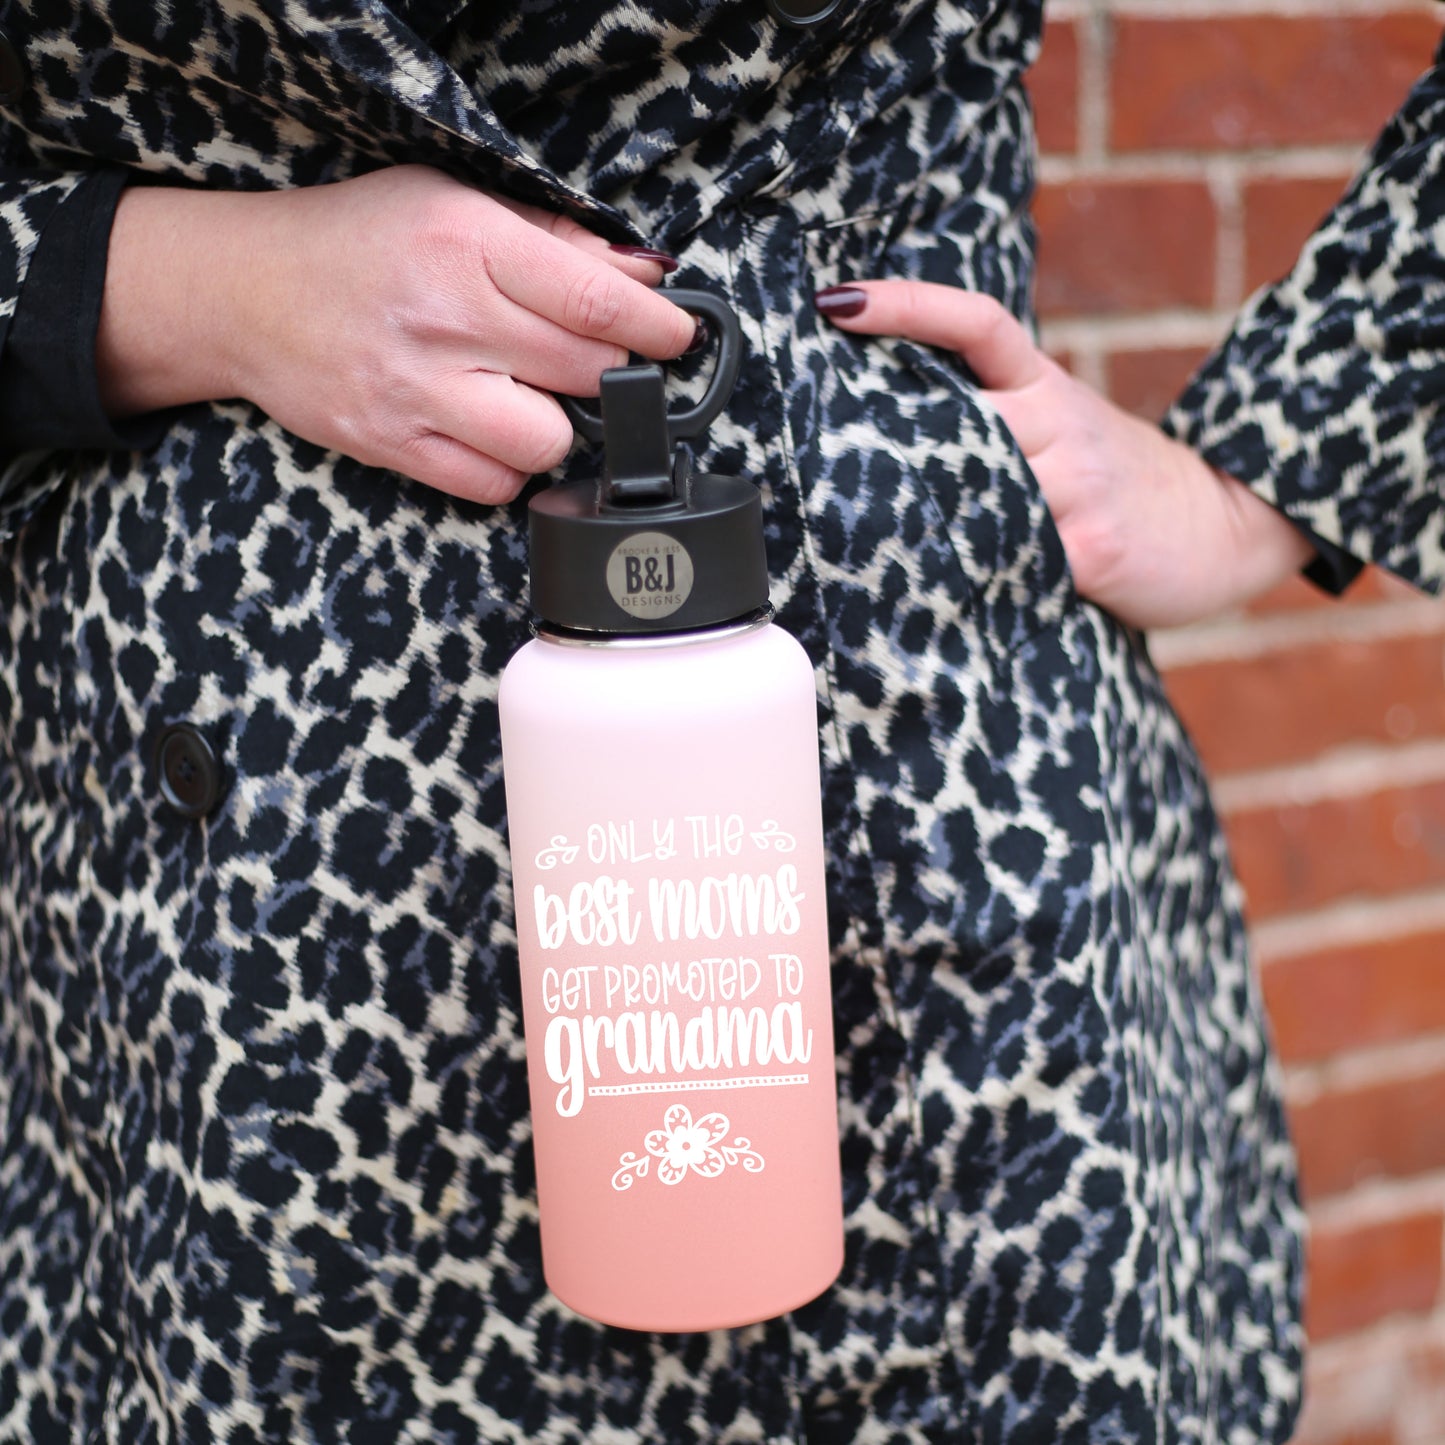 Best Moms Get Promoted to Grandma 32 oz Rose Gold Water Bottle for Grandmothers